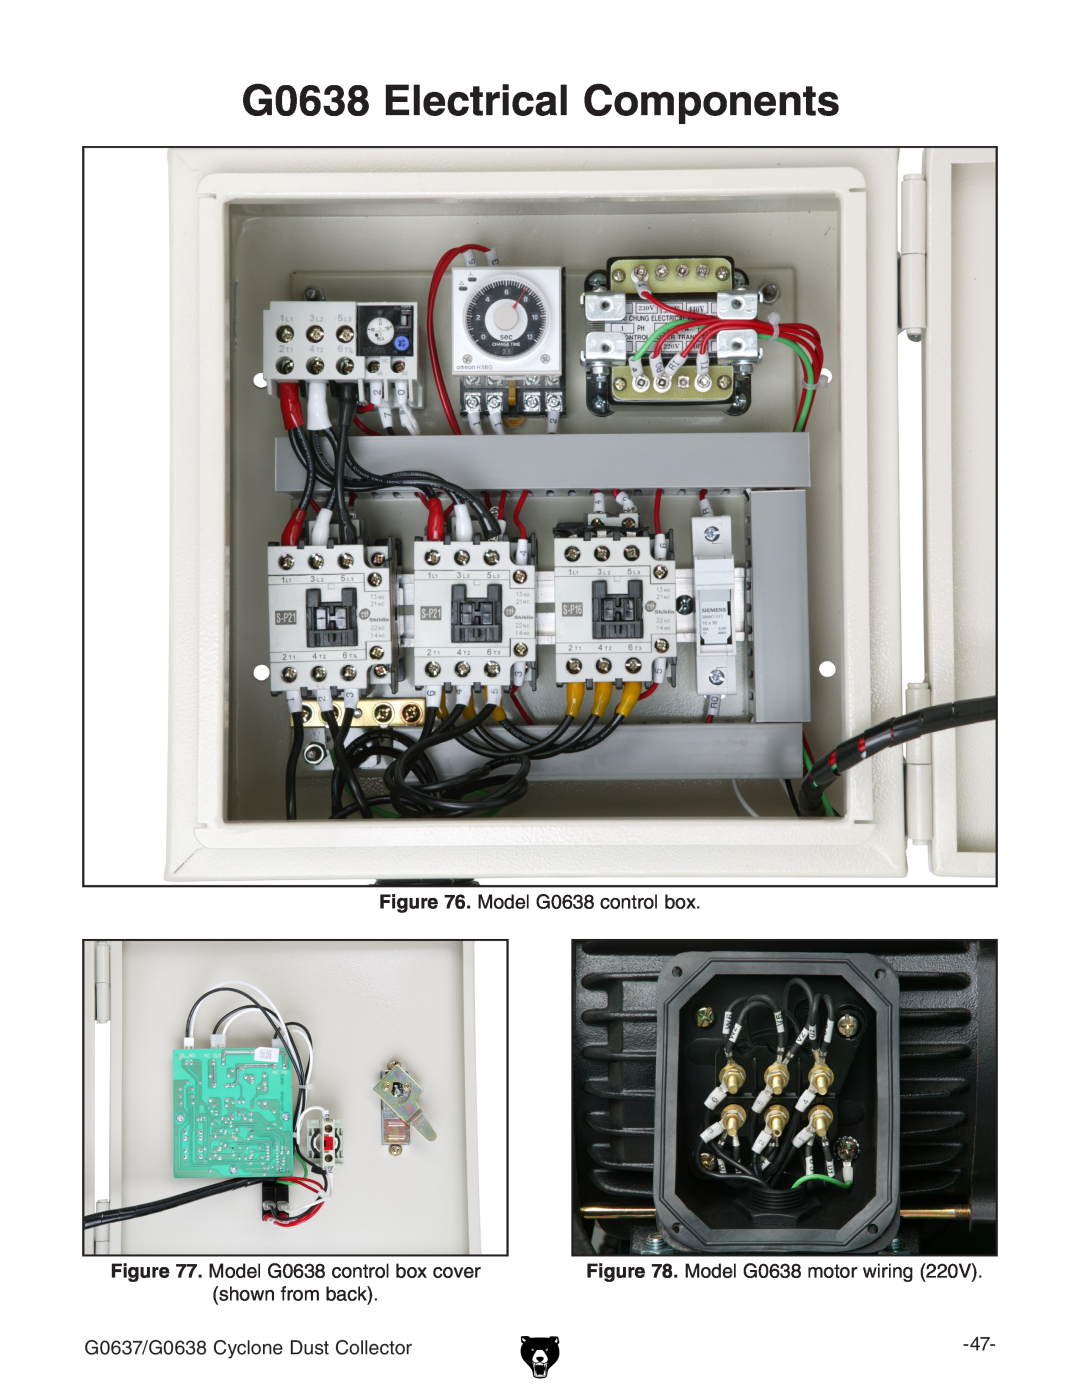 Grizzly G0638 Electrical Components, G0638 electrical components, Model G0638 control box, Model G0638 motor wiring 